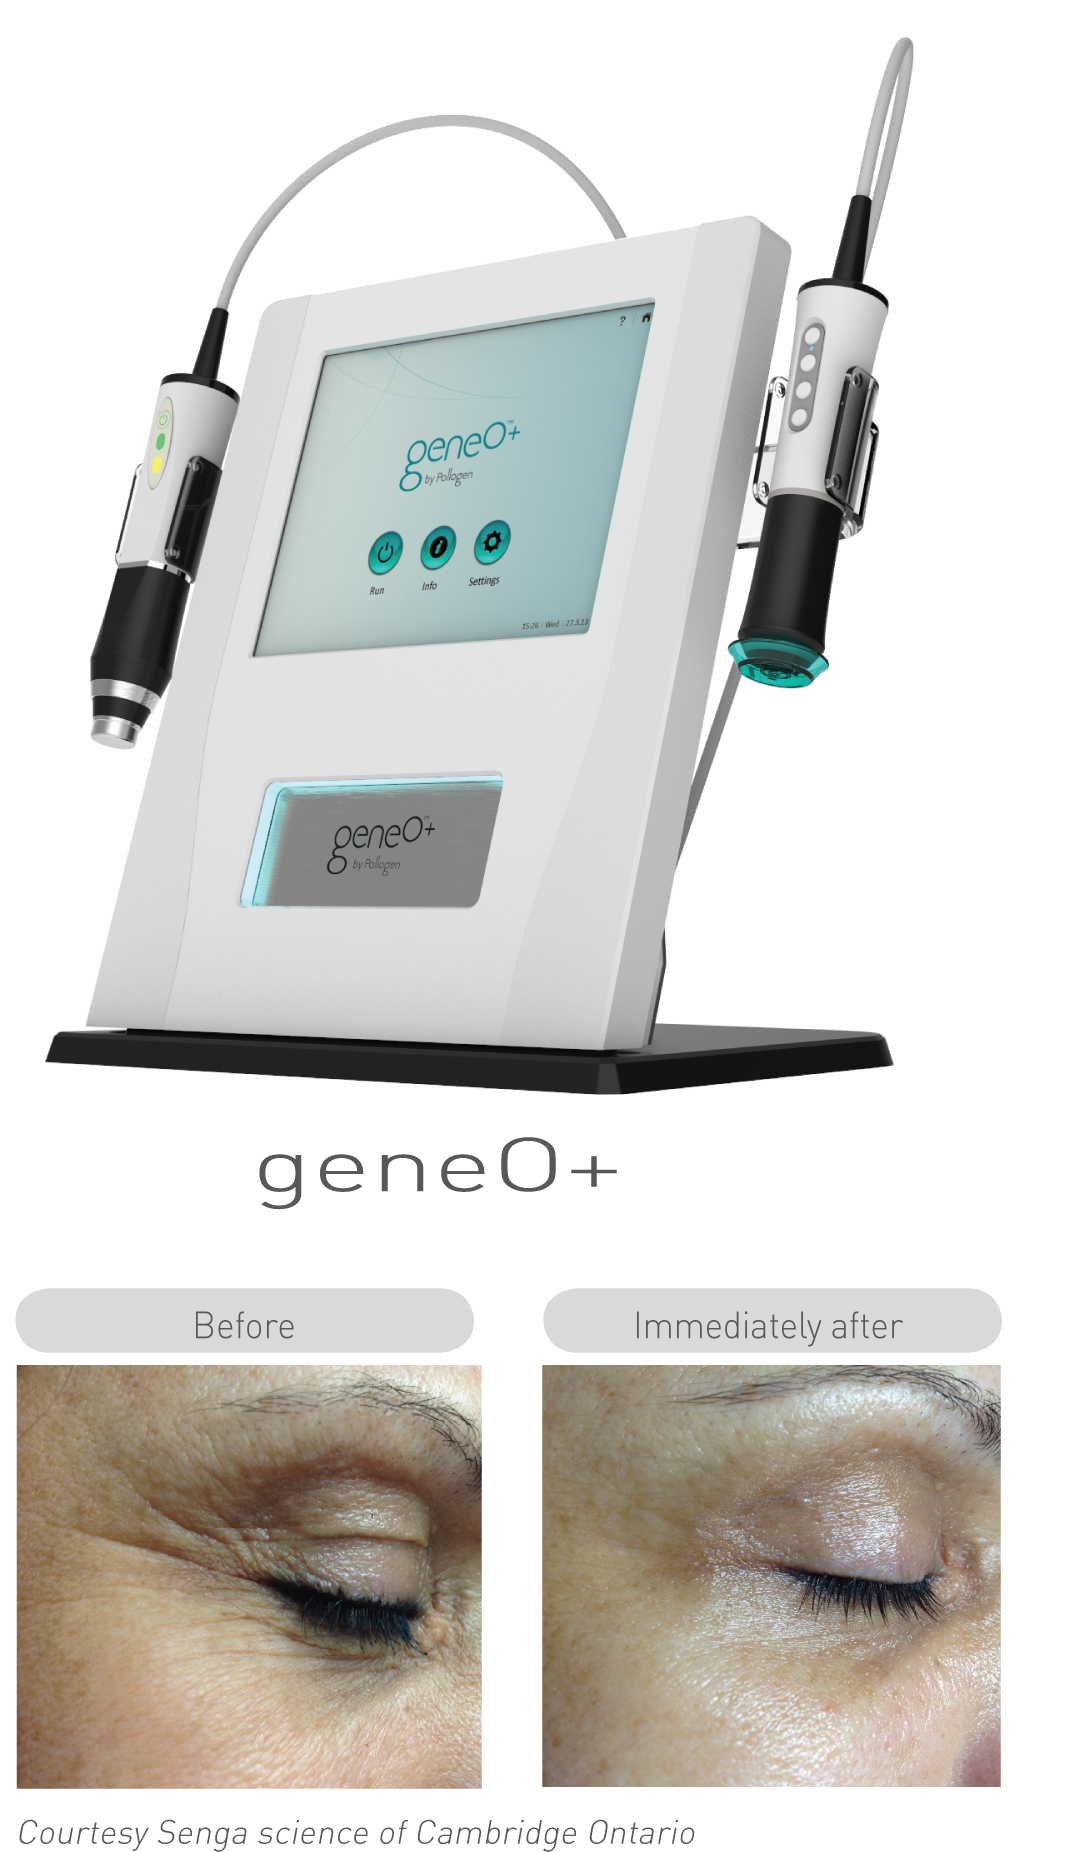 Spa Diva Now Offers Pollogen Oxygeneo 3 In 1 Super Facial Treatments